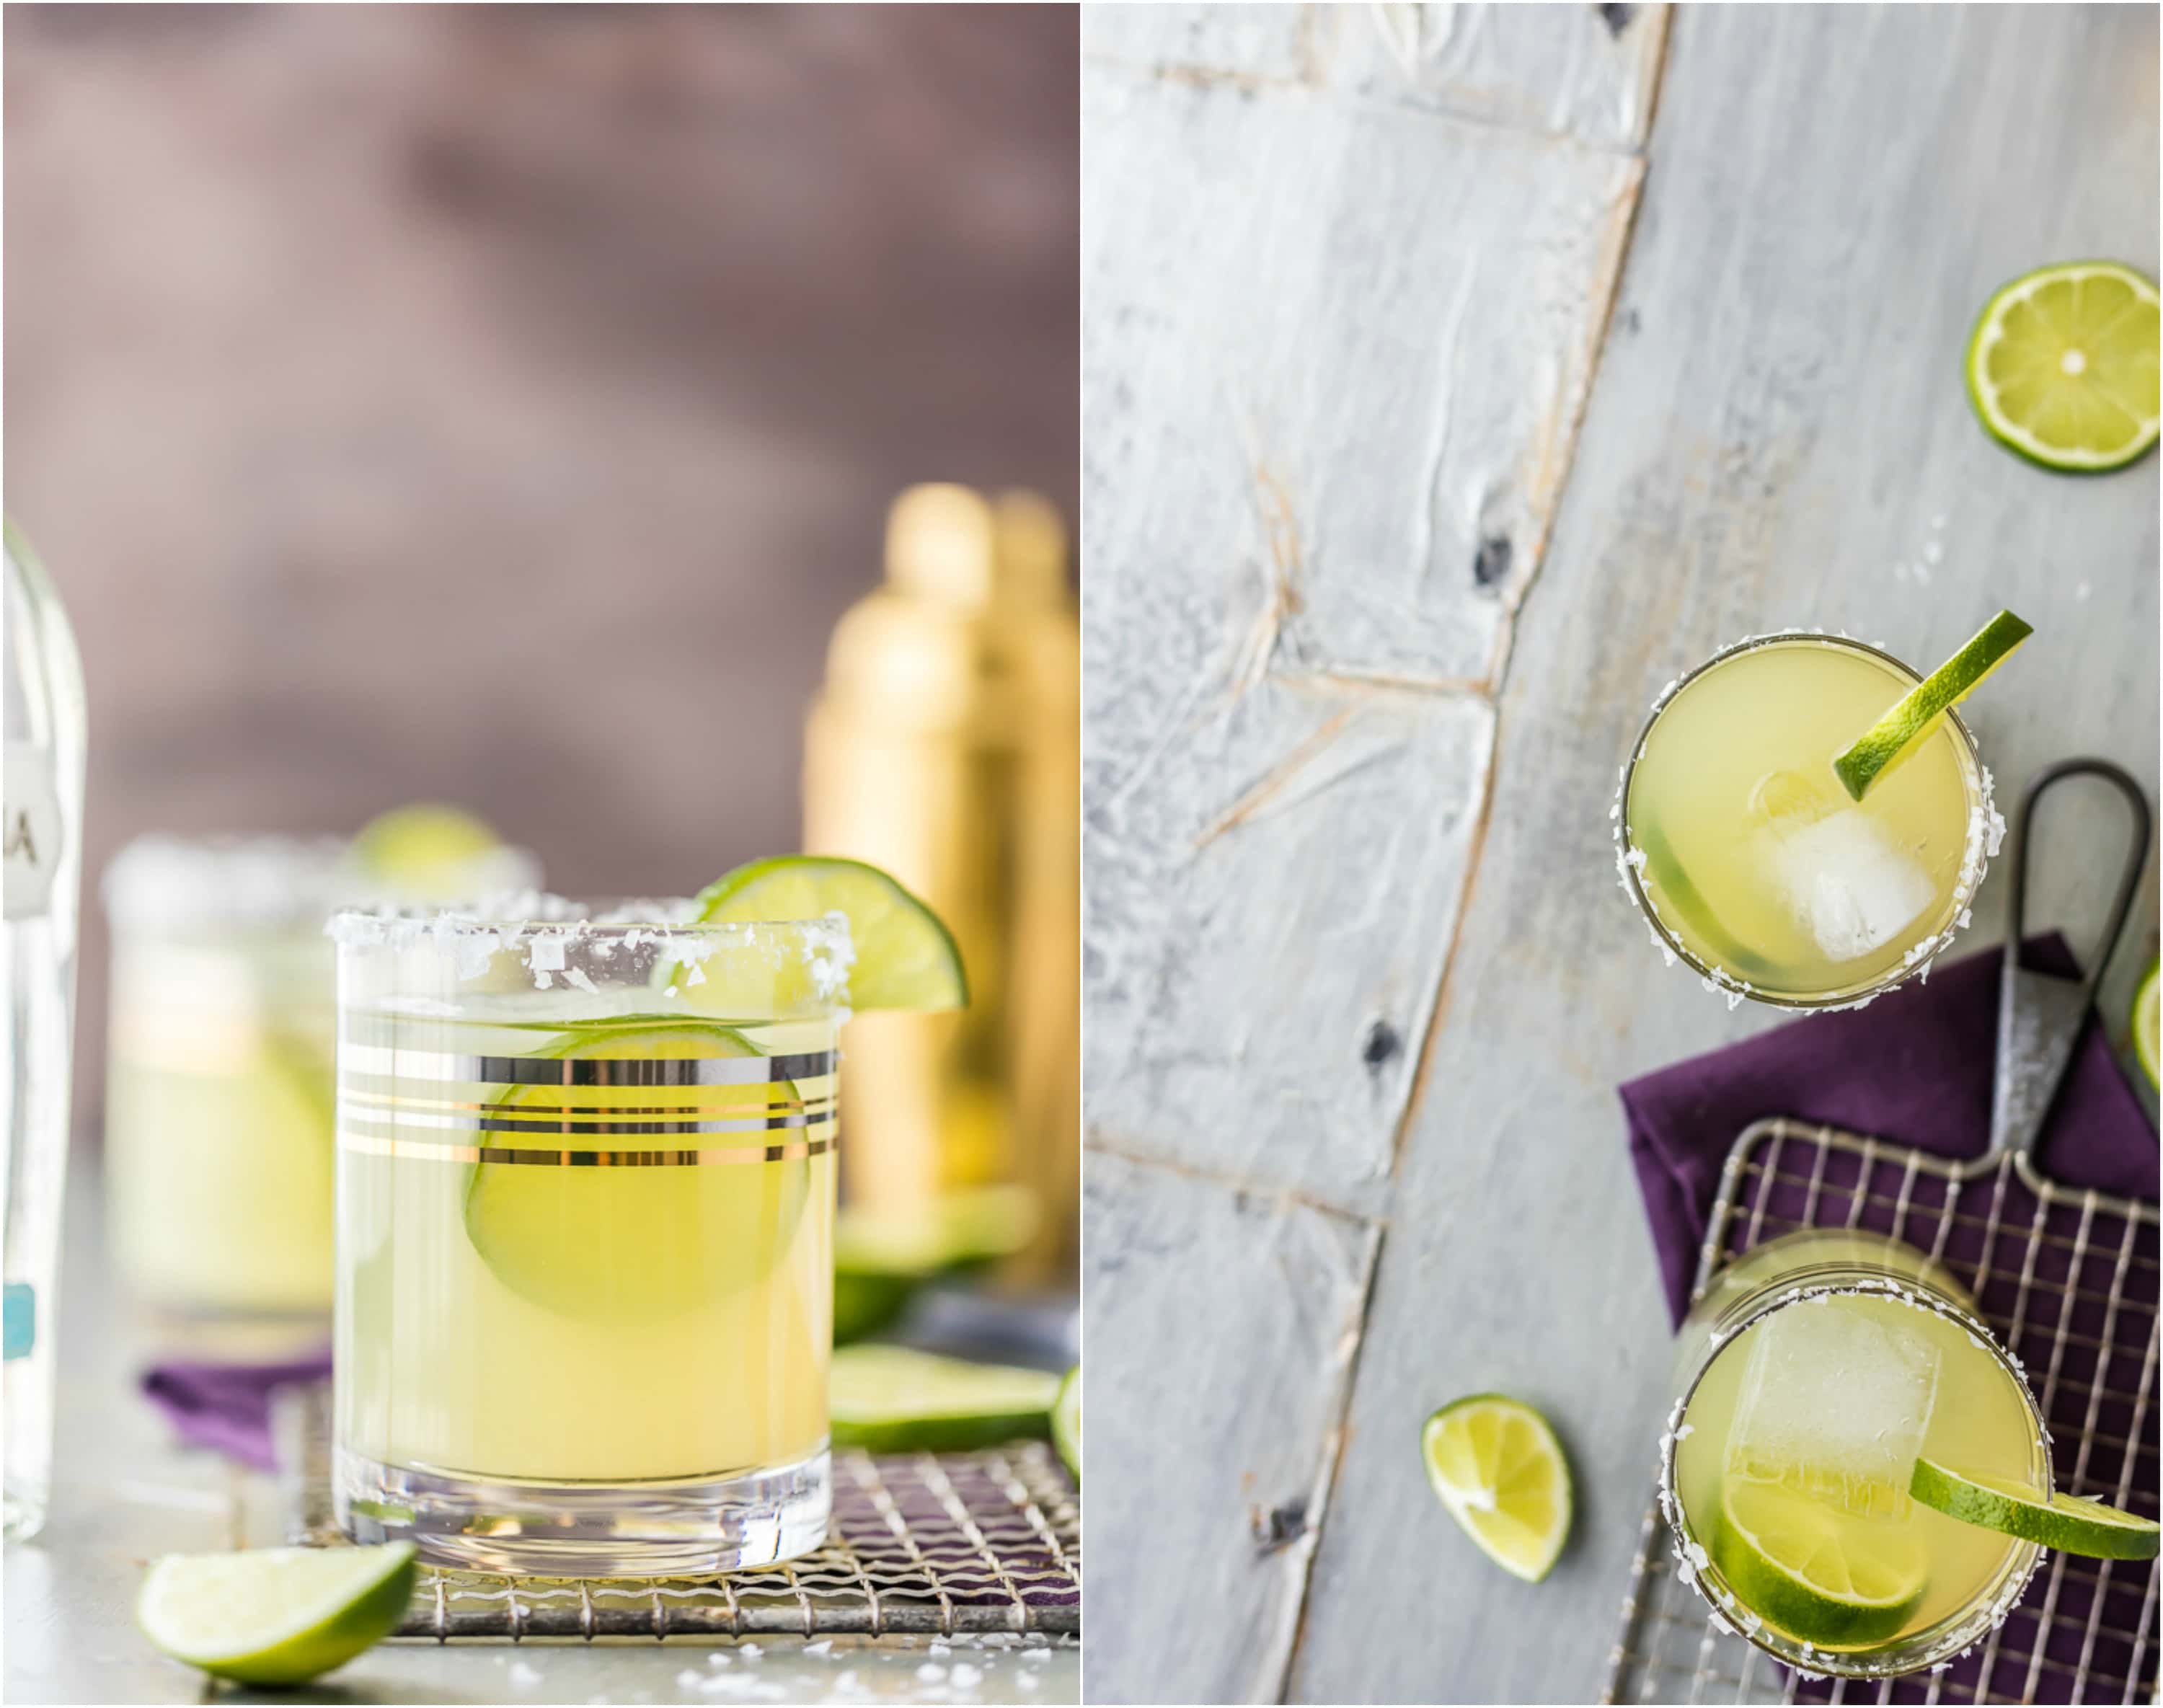 This Skinny Margarita Recipe is my go-to simple margarita recipe! With only 5 ingredients (good tequila, fruit juices, agave nectar, and soda) and lots of flavor, this classic margarita is a guilt free cocktail. This Skinny Margarita is just perfect for Cinco de Mayo!